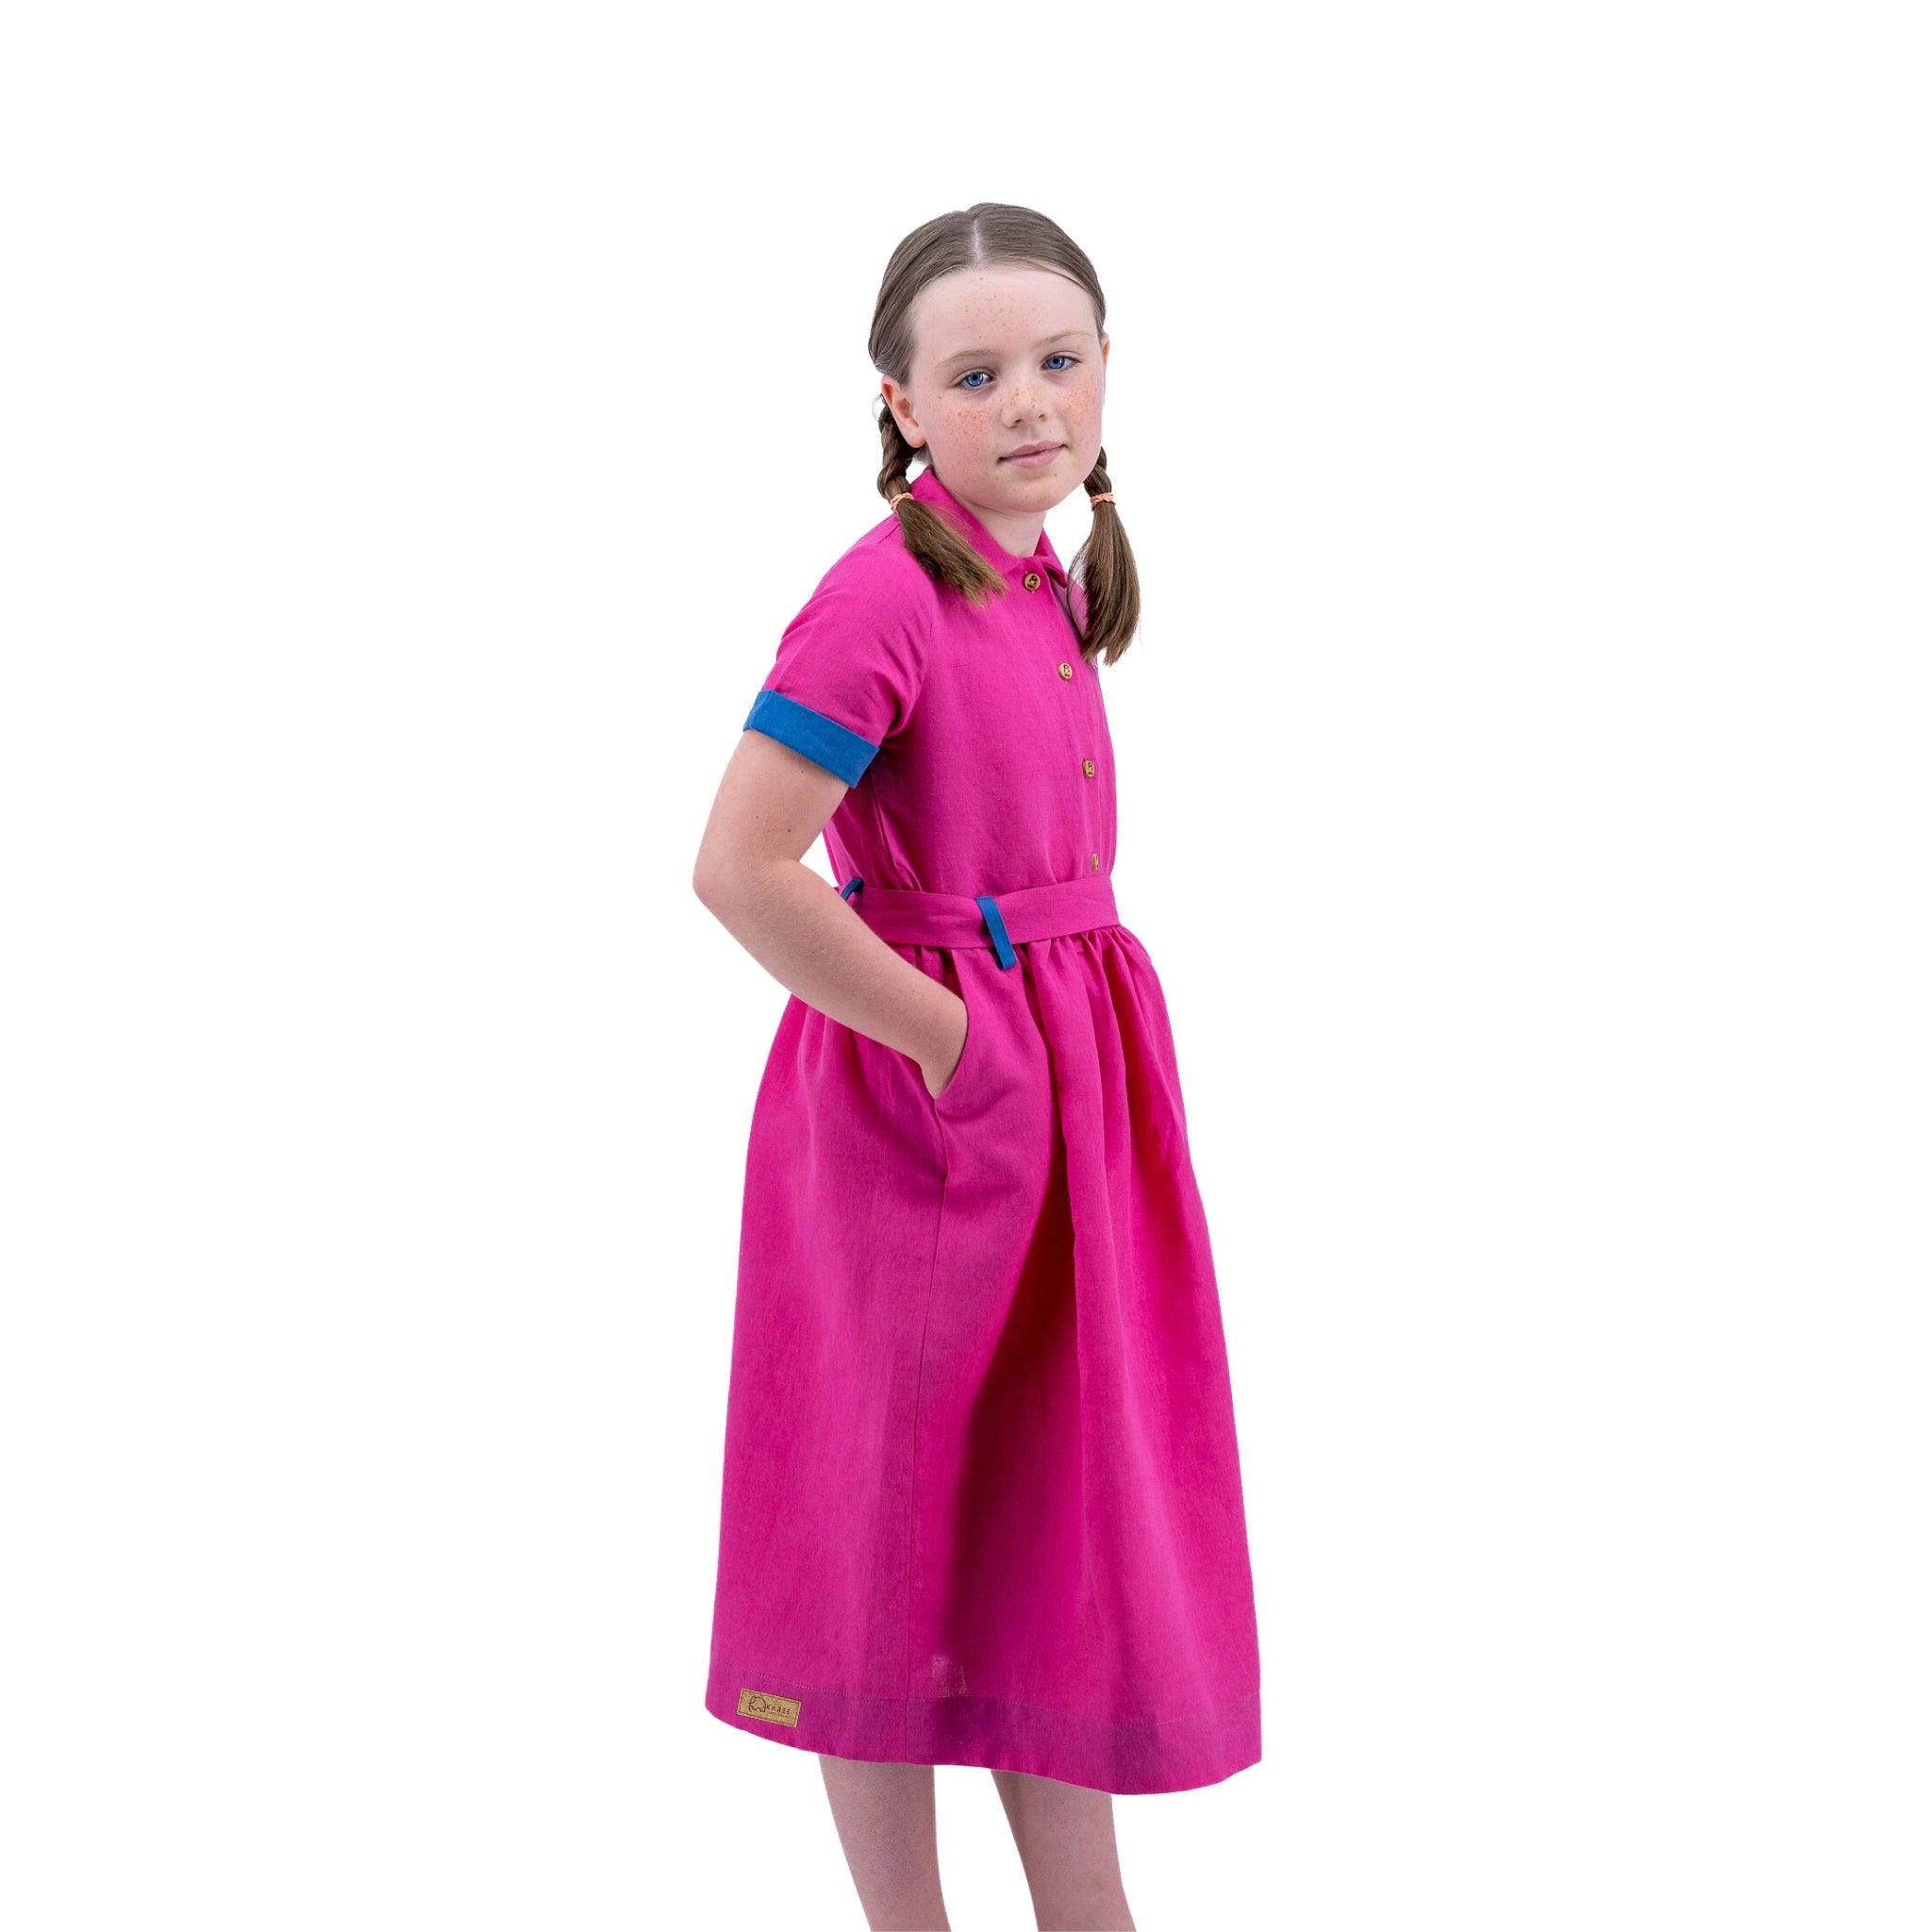 Young girl in a Karee fuchsia purple linen dress and braided hair, looking over her shoulder, standing against a white background.